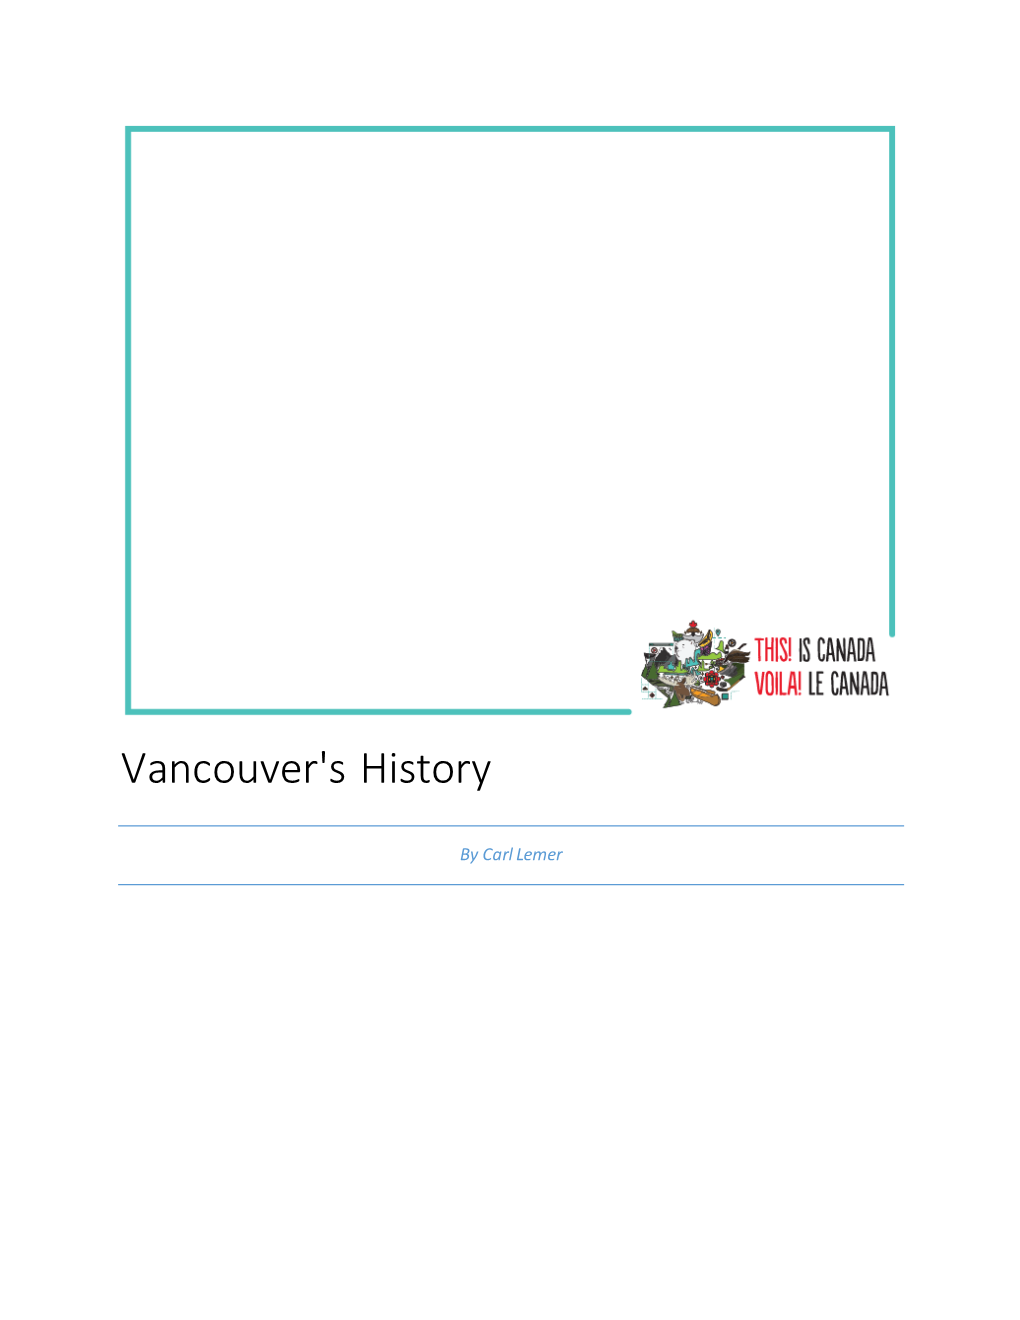 Vancouver's History